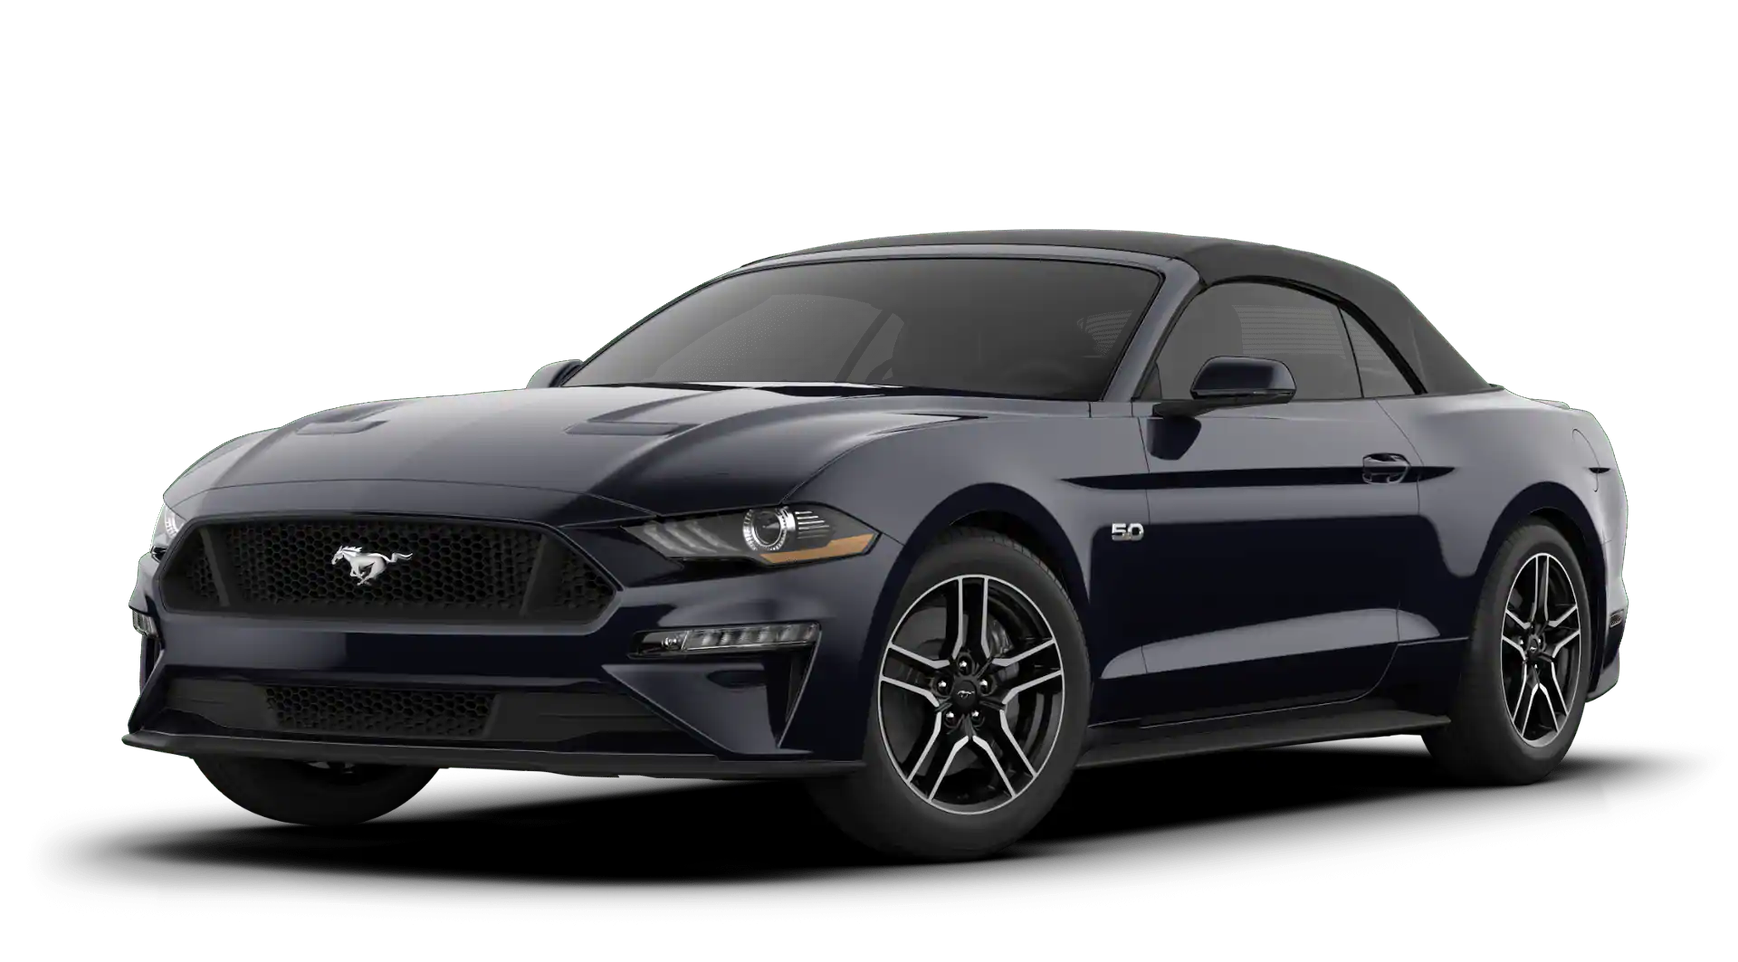 2020 Ford Mustang Gt Premium Convertible Review
